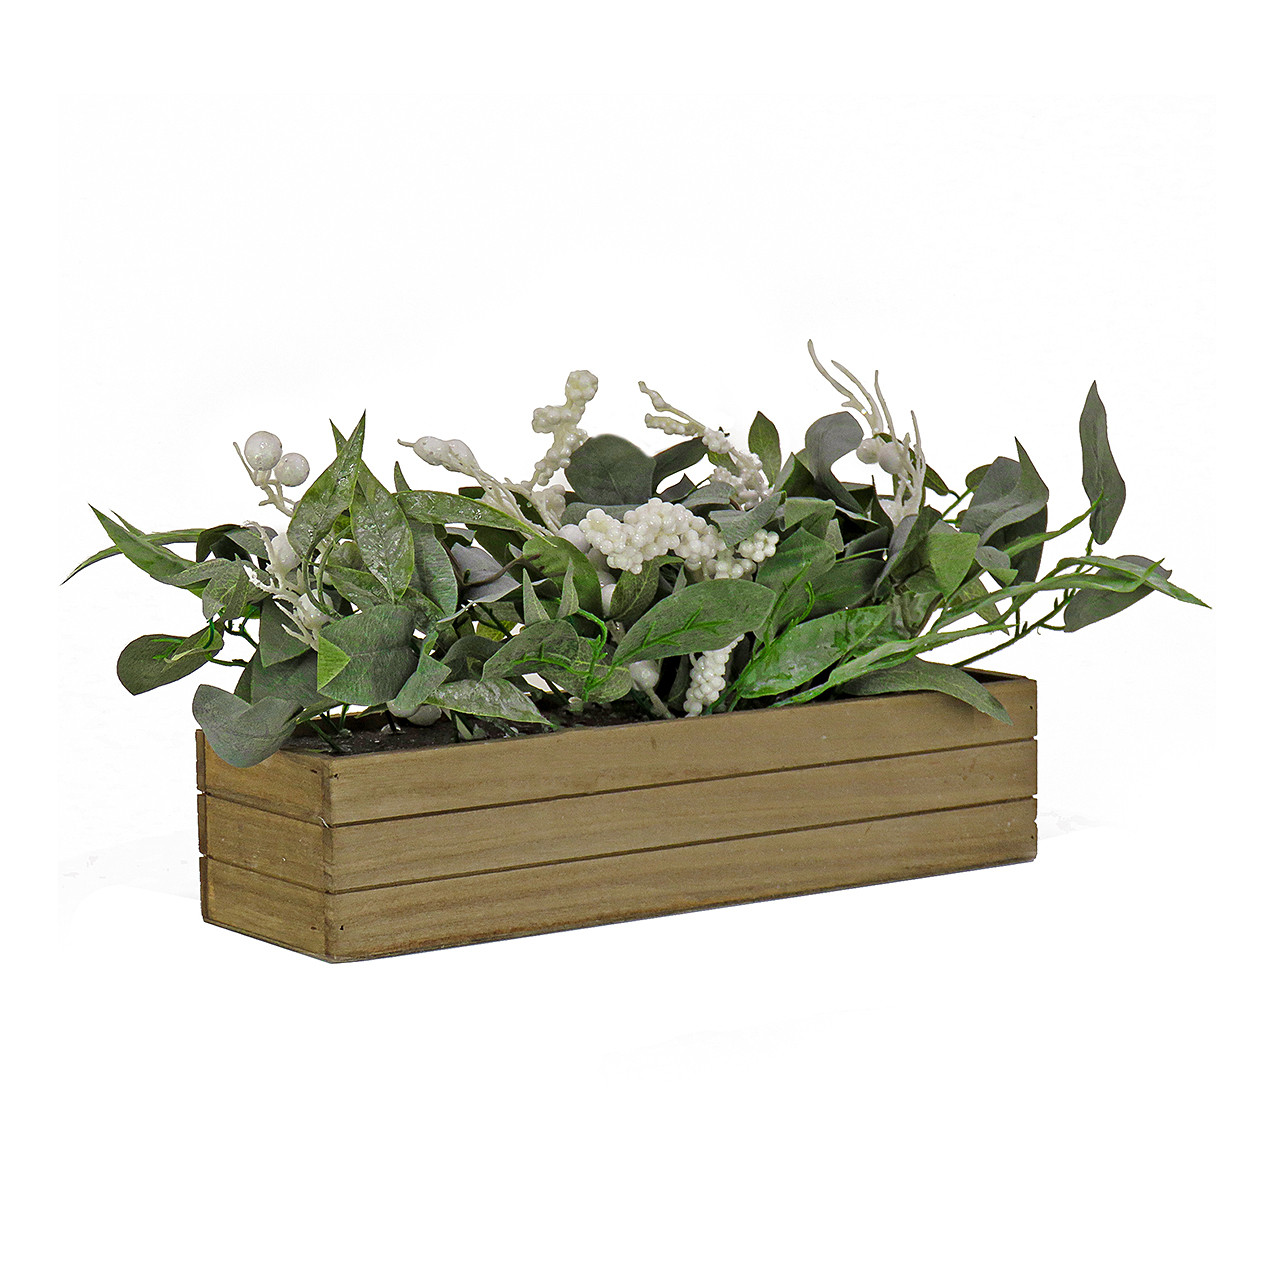 22 in. Planter Box with Christmas Greenery